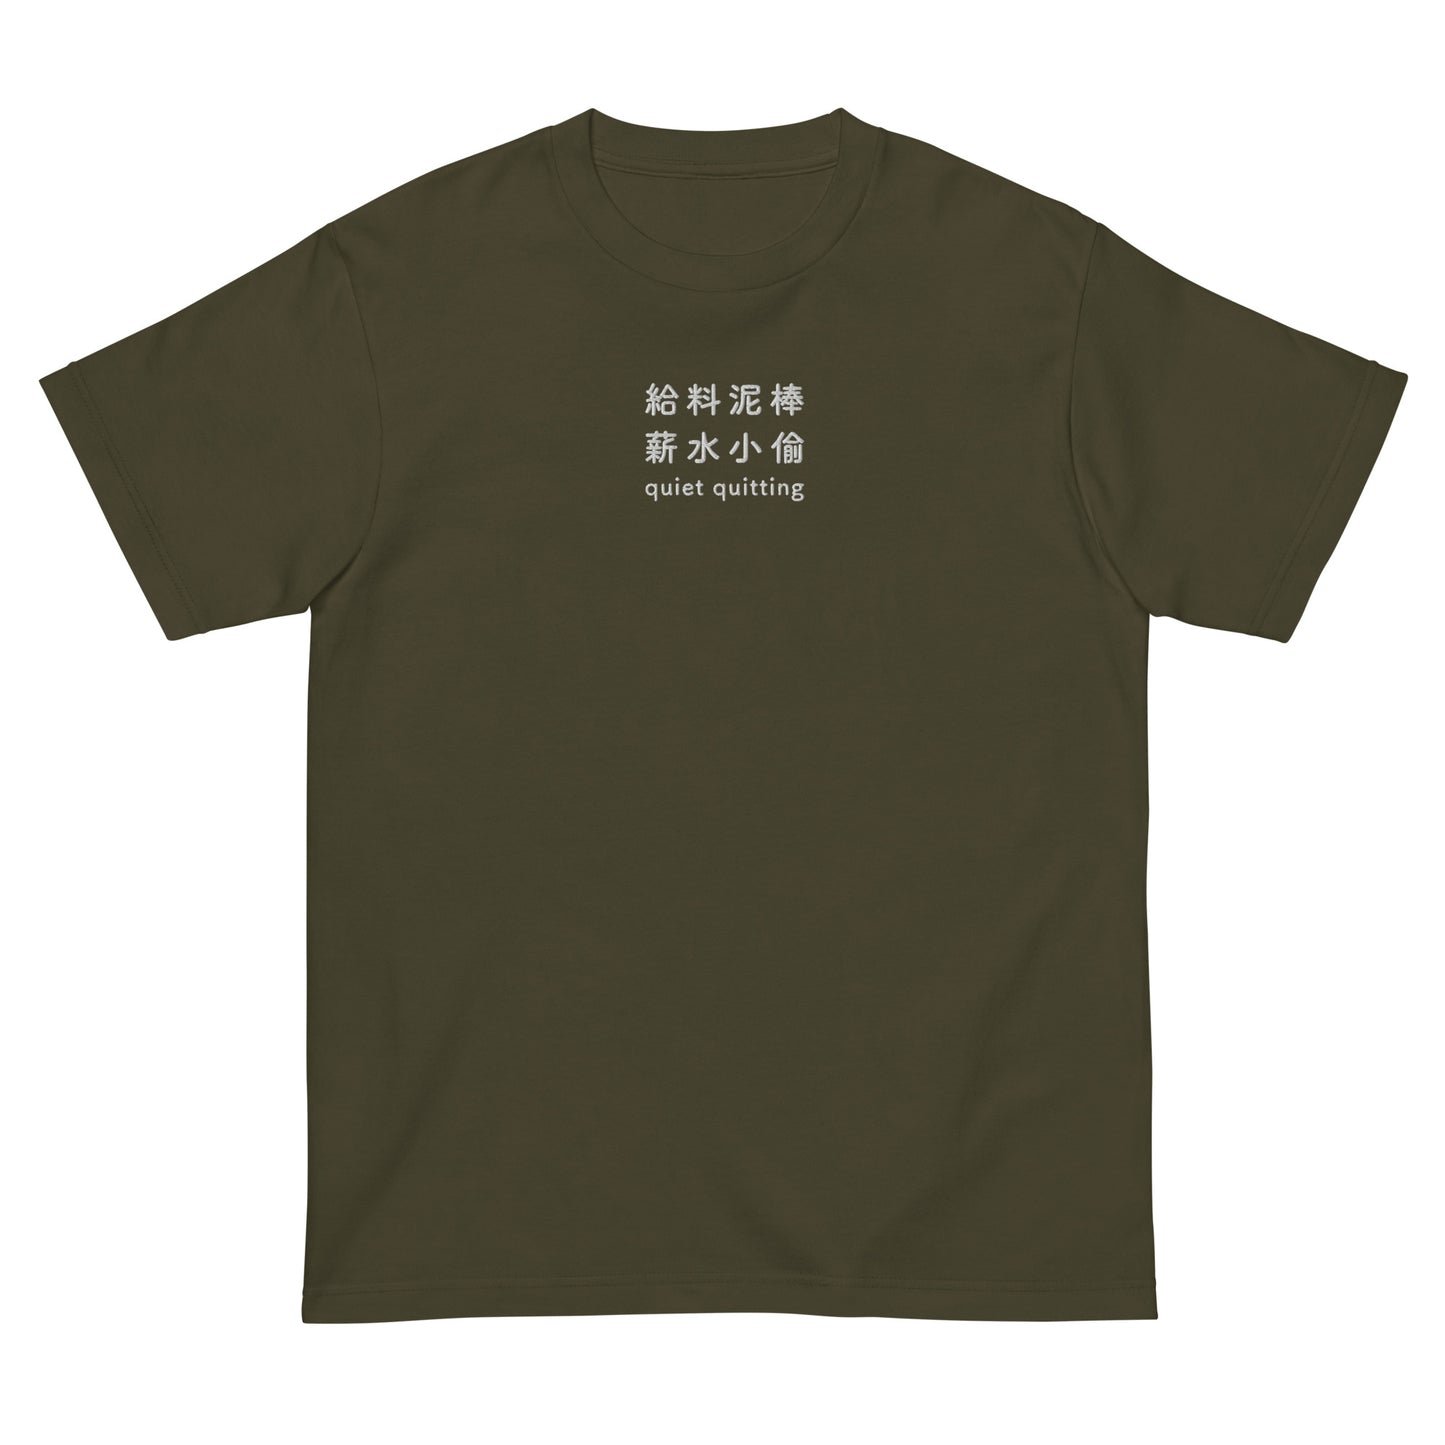 Green High Quality Tee - Front Design with an White Embroidery "Quiet Quitting" in Japanese,Chinese and English